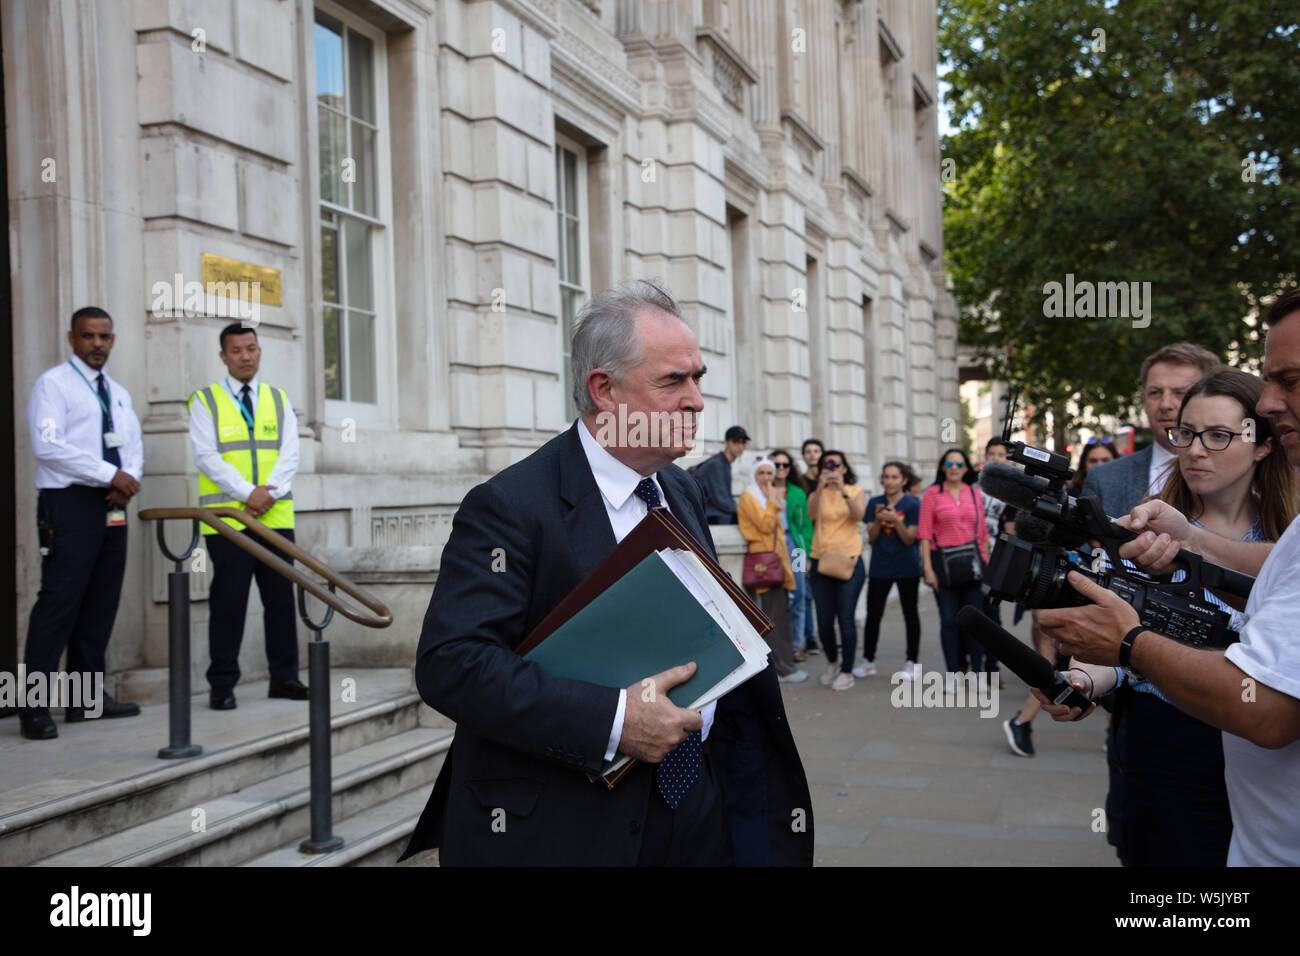 London, UK. 29th July, 2019. Attorney General and member of the Brexit 'War Cabinet', Geoffrey Cox leaves Cabinet Office in Whitehall this afternoon, after attending a meeting with the Exit Strategy Committee (XS) in Cabinet Office. Credit: Joe Kuis / Alamy News Stock Photo